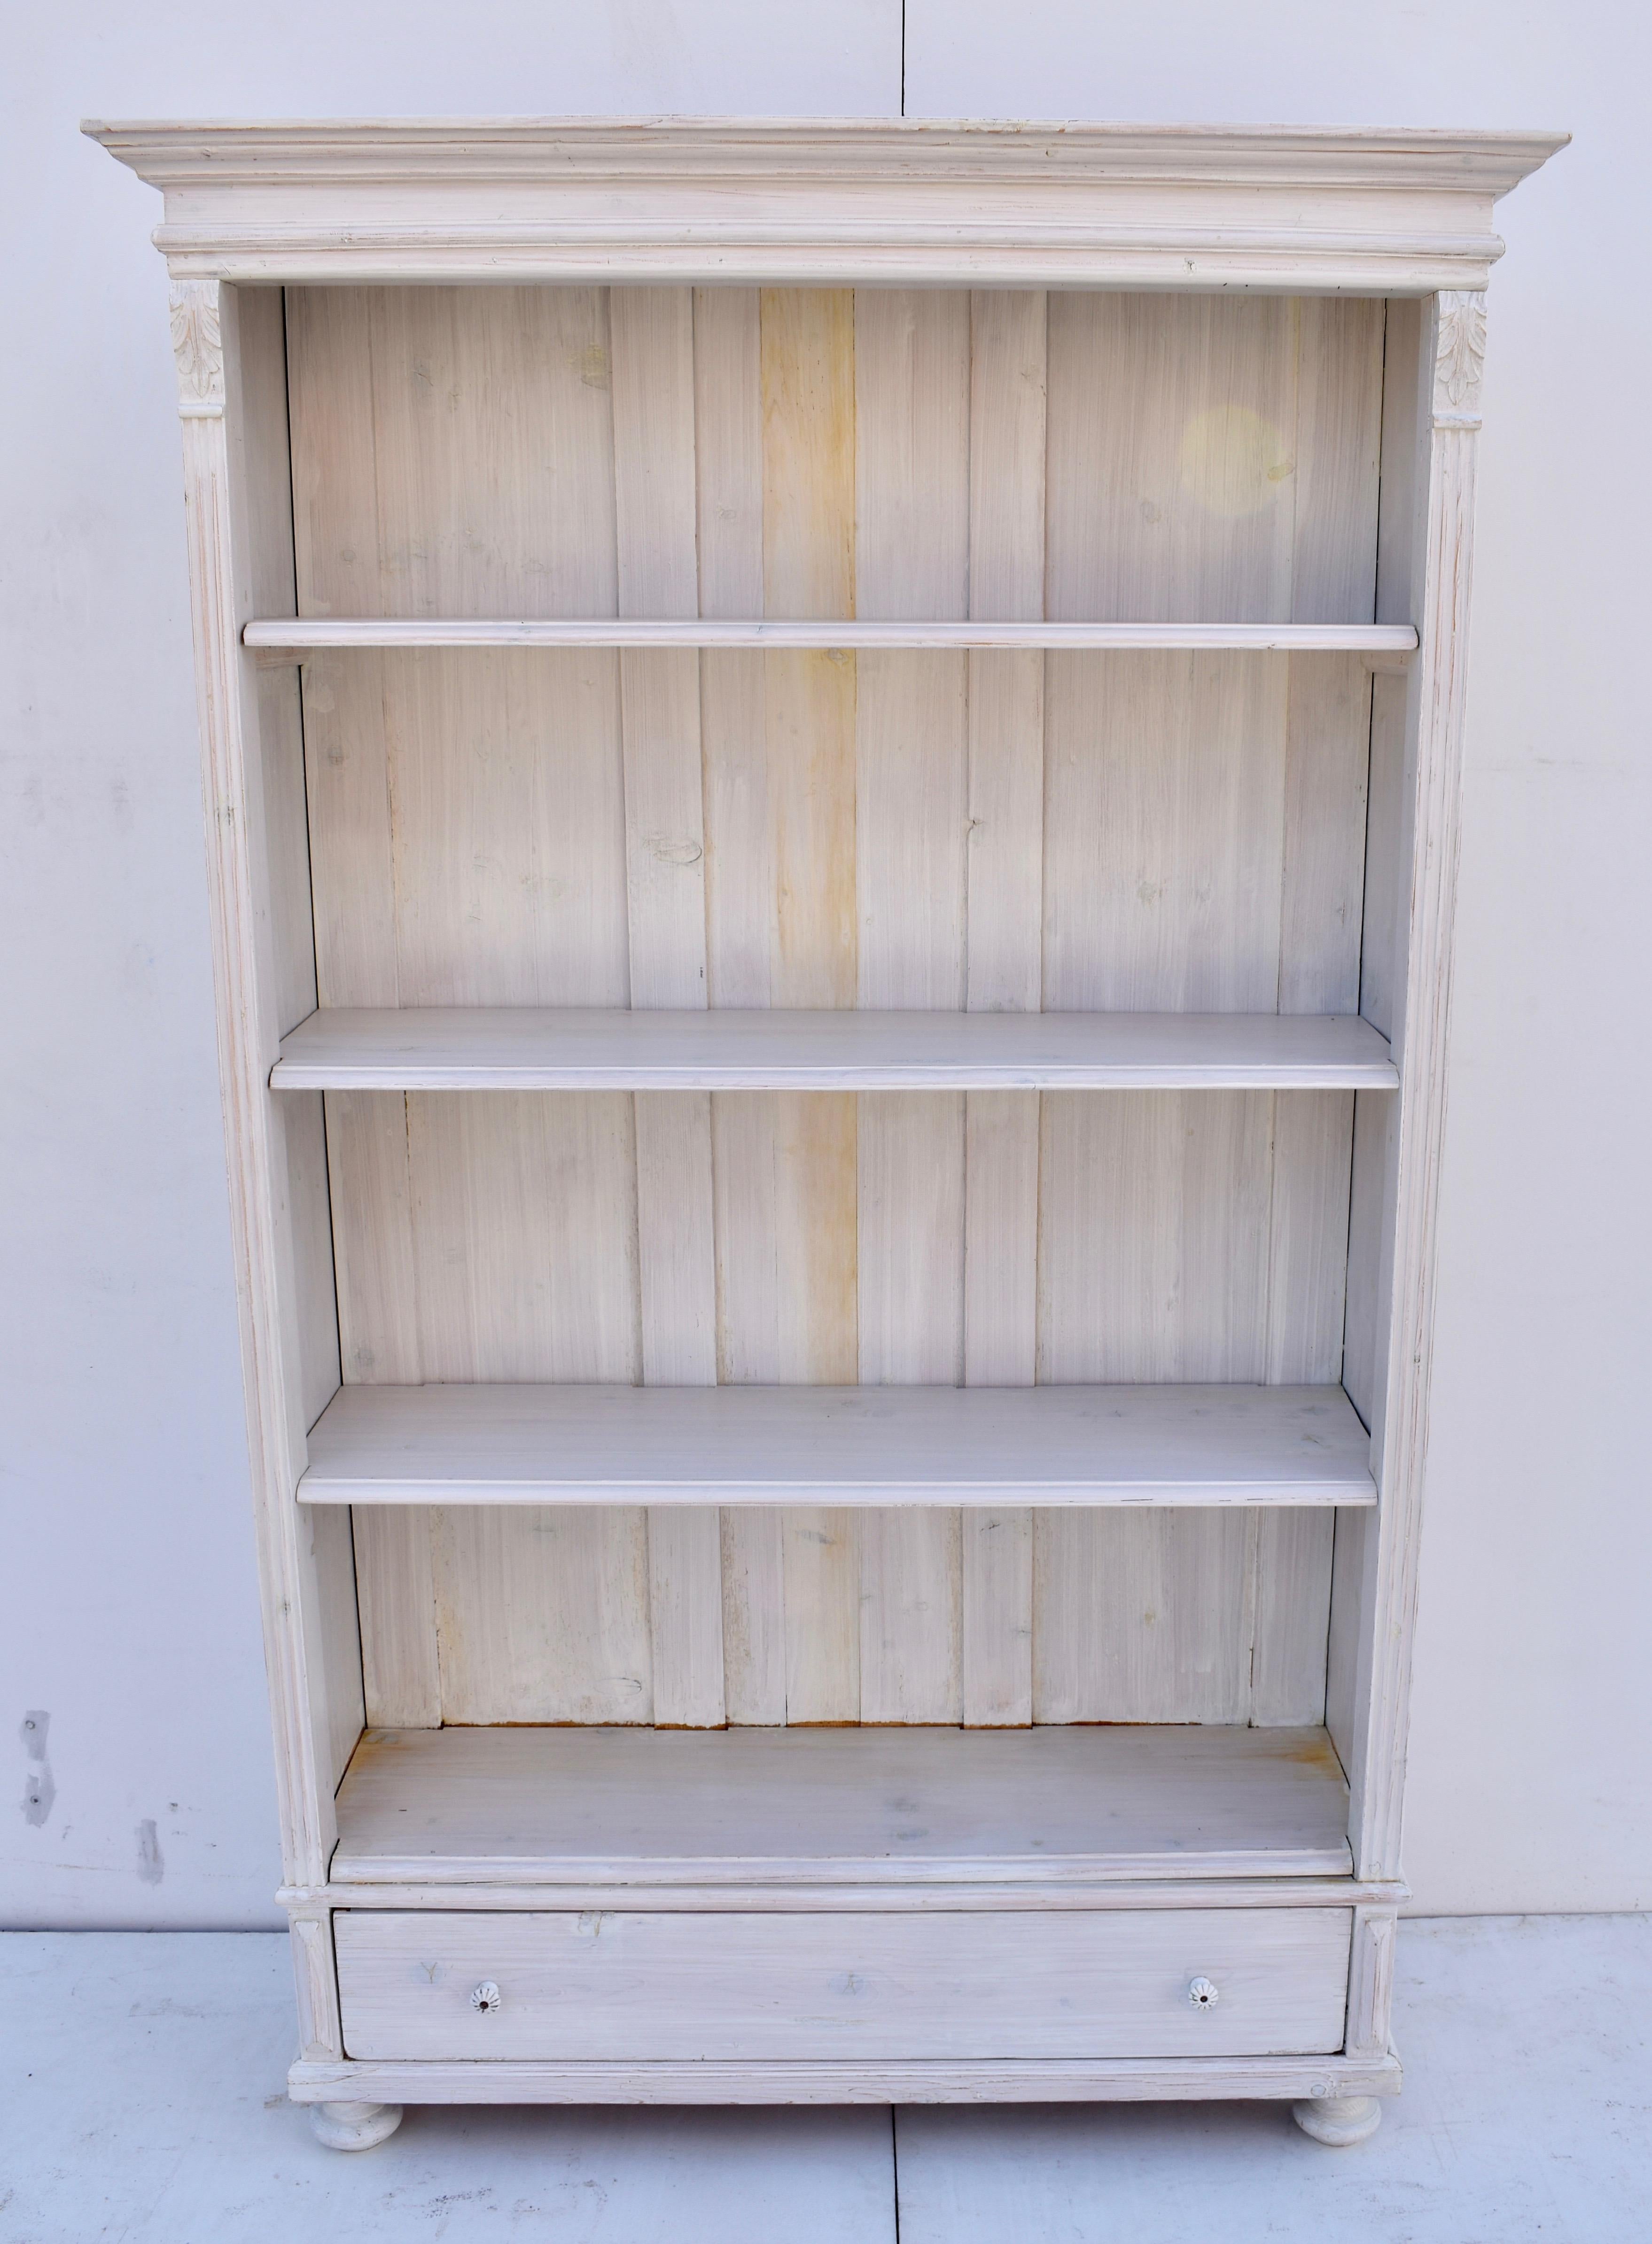 Antique pine bookcases are hard to find so the shell of this piece was provided by a vintage pine armoire which had suffered some damage or perhaps lost a door. With one board width removed from the sides and the original backboards and crown